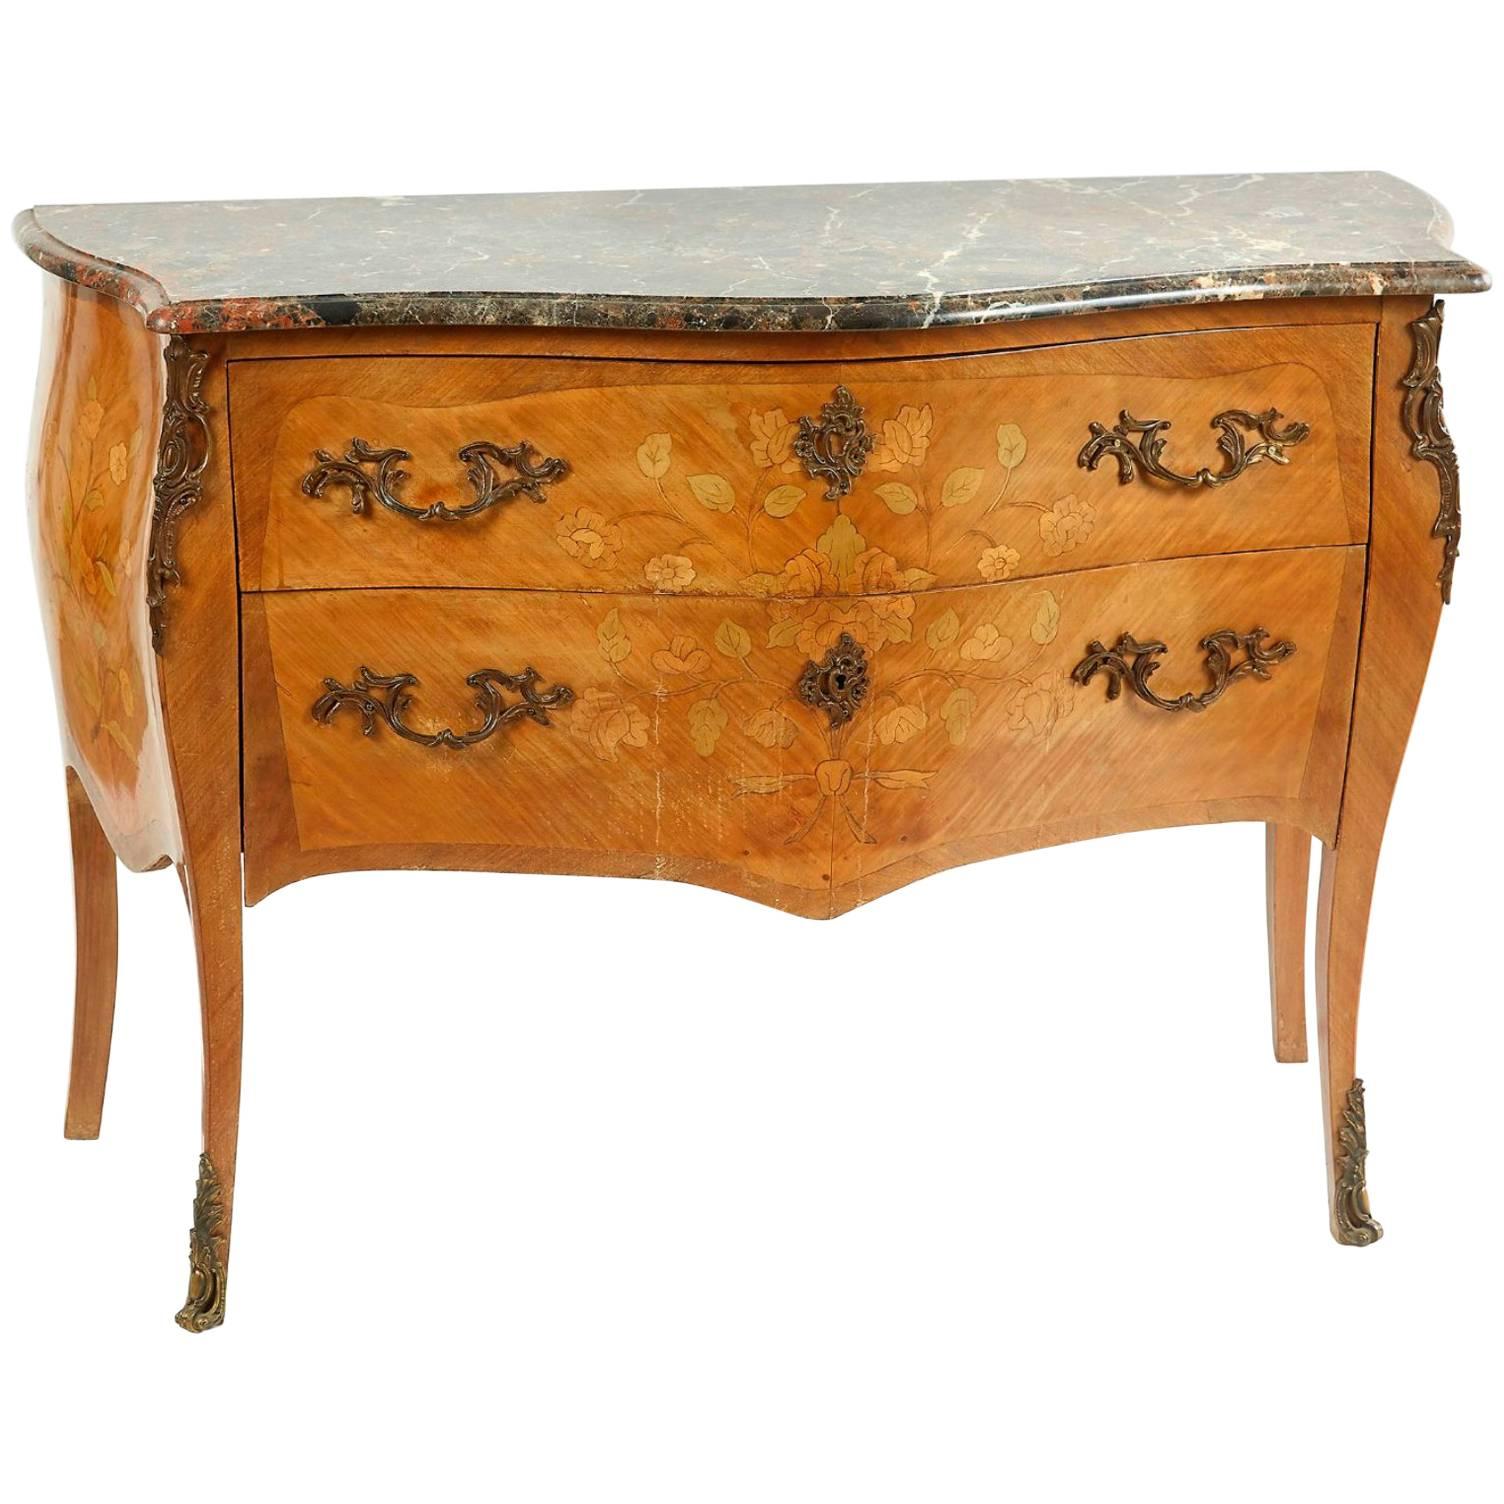 Magnificent 19th Century Marble-Top Bombe Commode from France For Sale